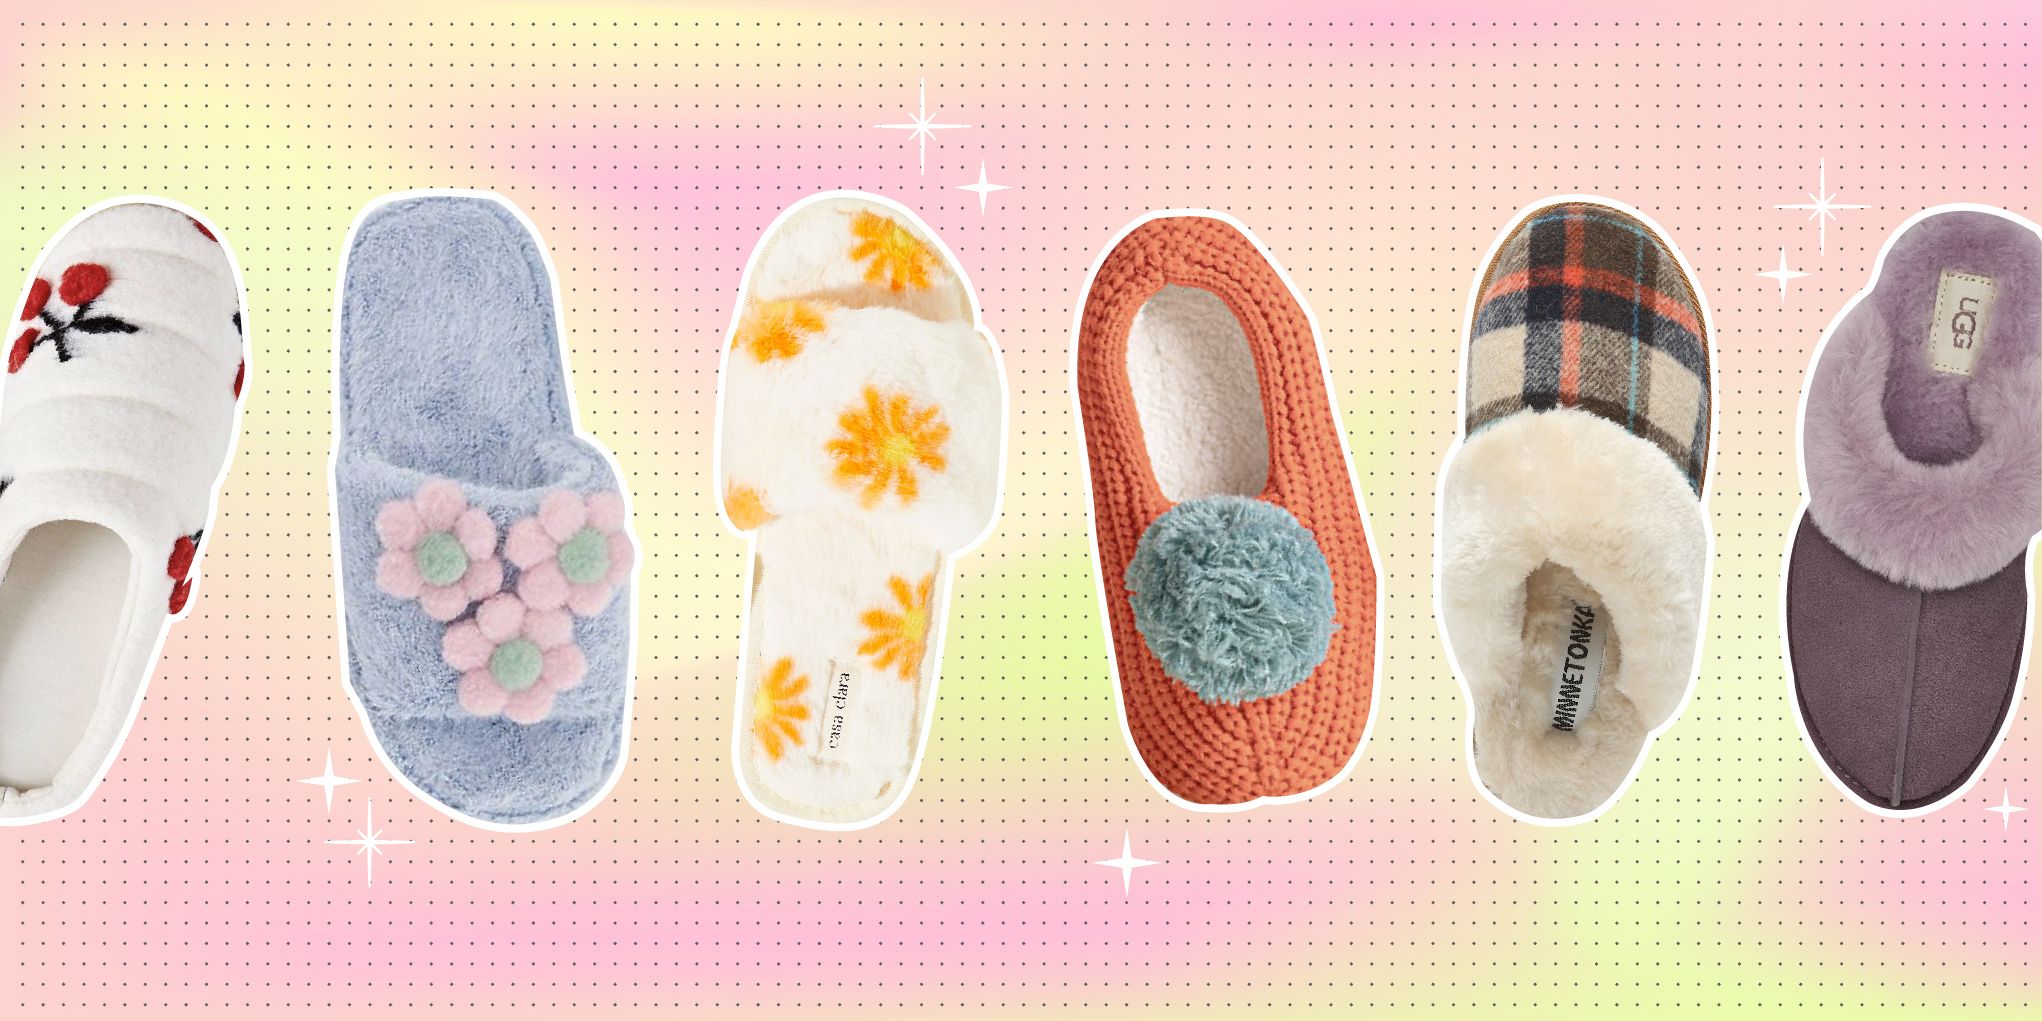 27 Cute Slippers for 2021 - Fluffy House Slippers